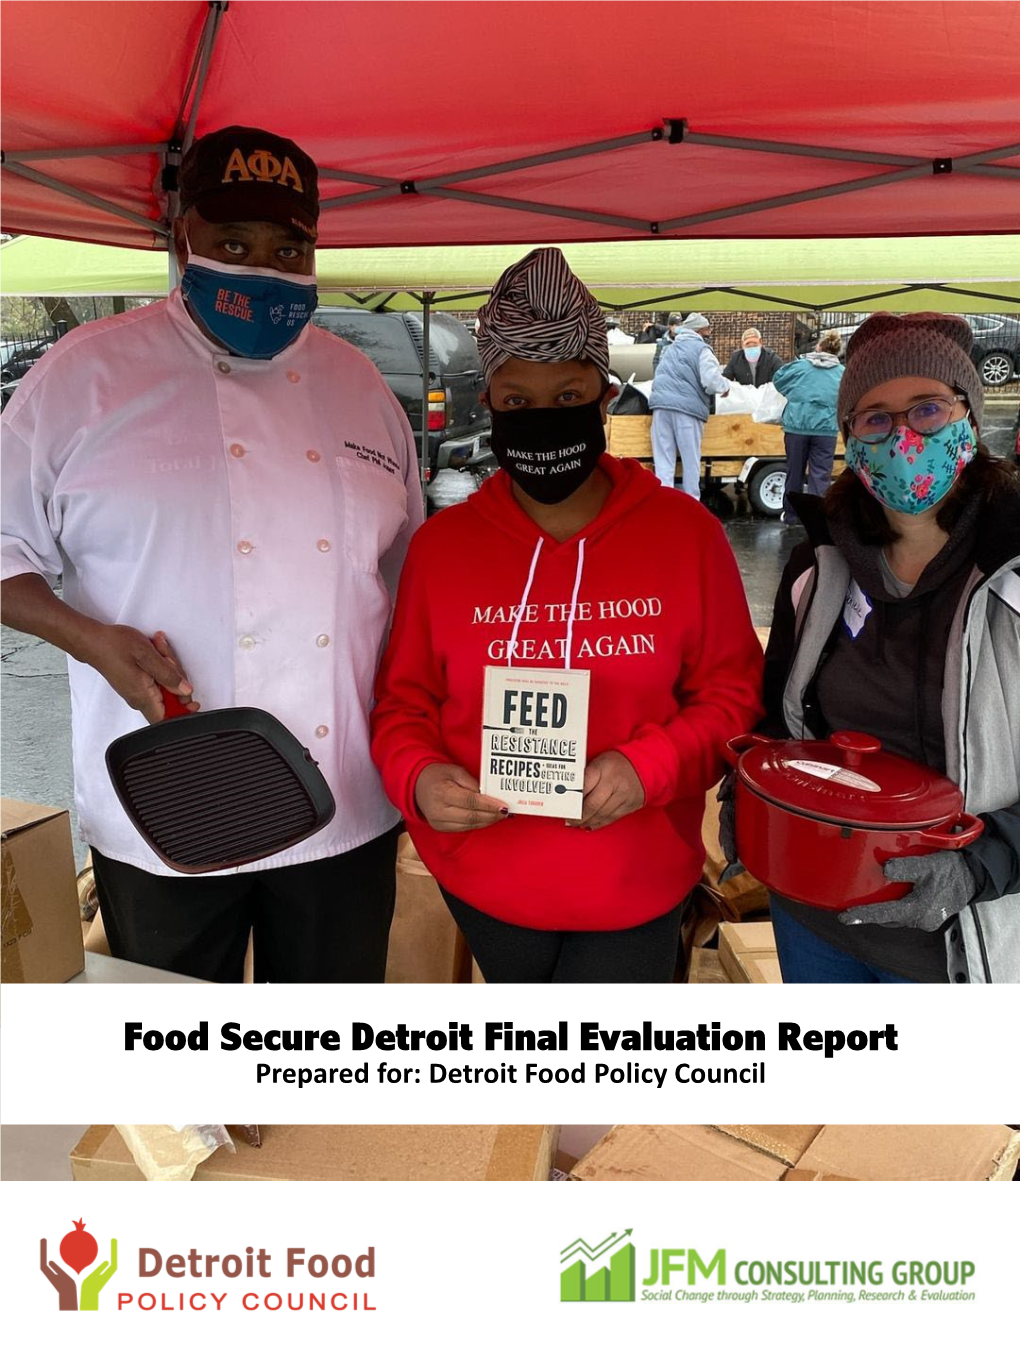 Food Secure Detroit Final Evaluation Report Prepared For: Detroit Food Policy Council Summary